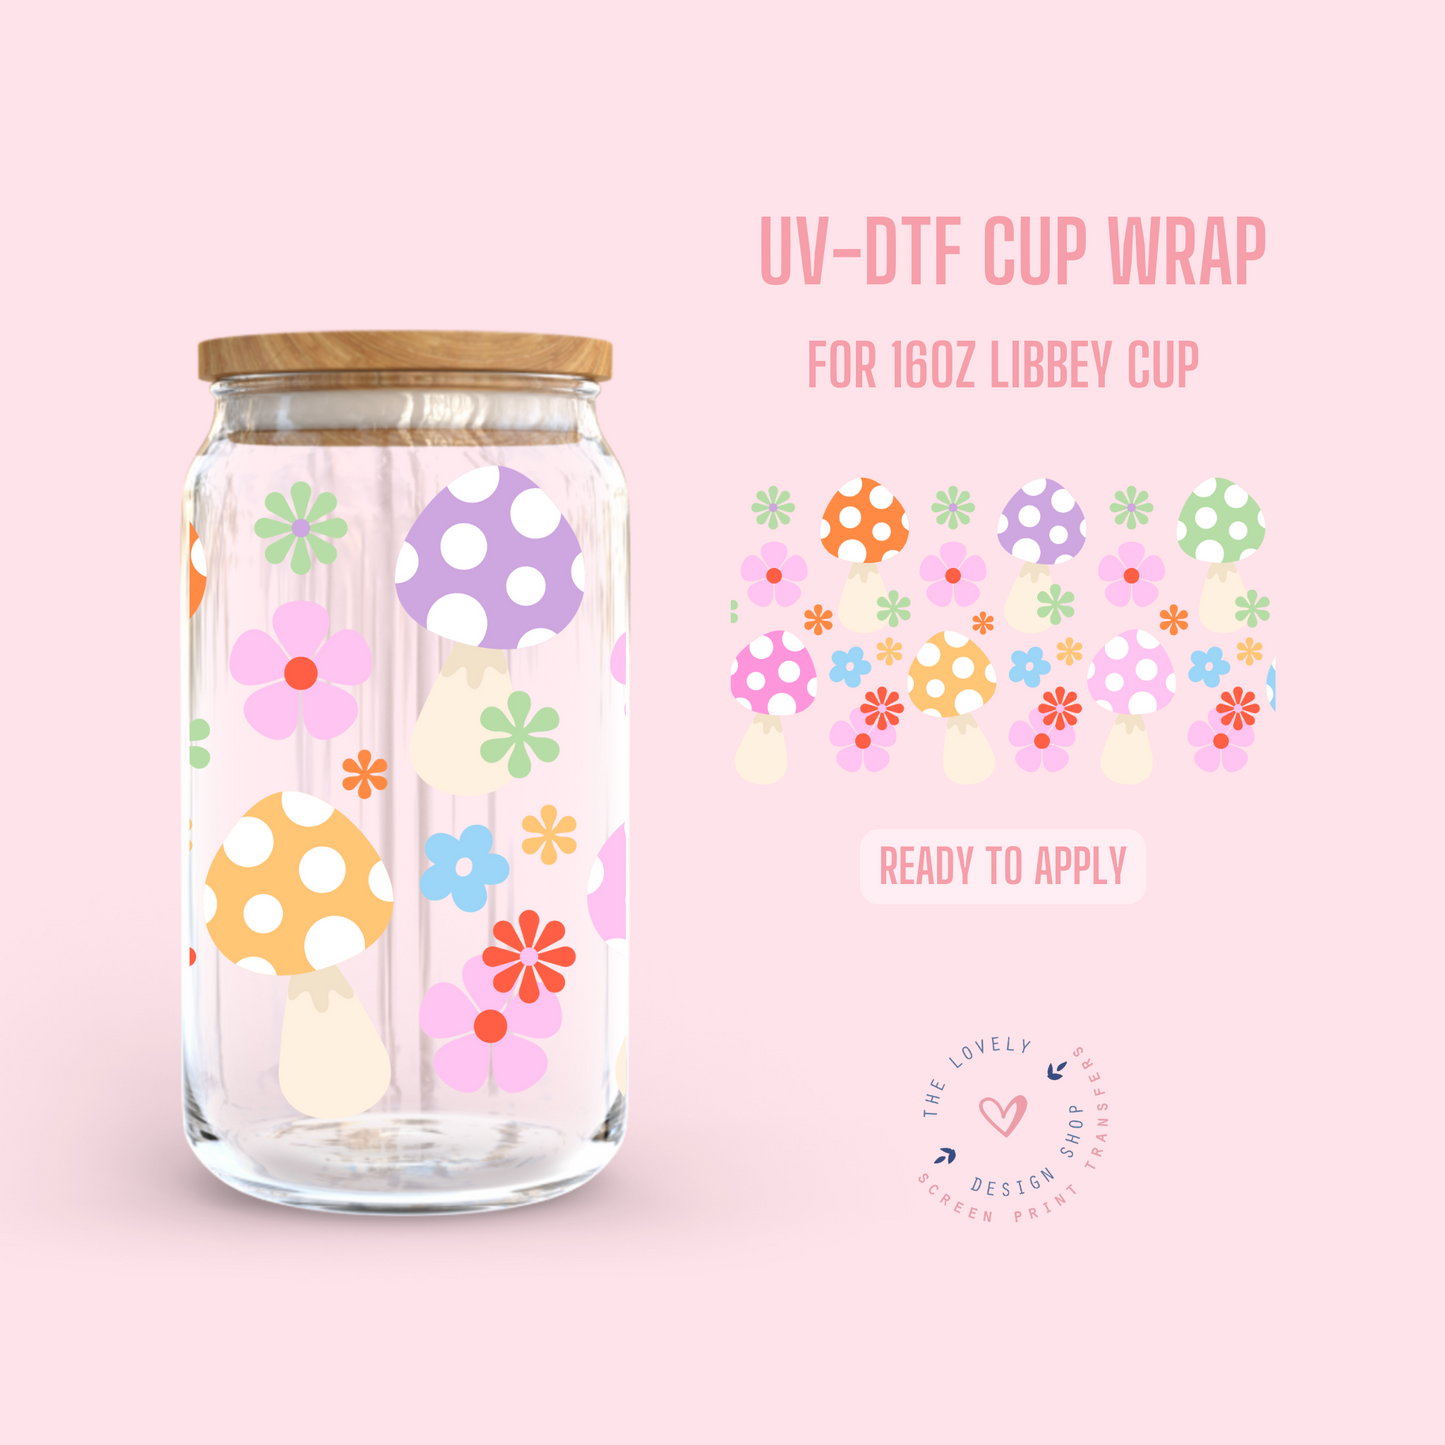 Colorful Floral Mushrooms - UV DTF 16 oz Libbey Cup Wrap (Ready to Ship) Feb 27